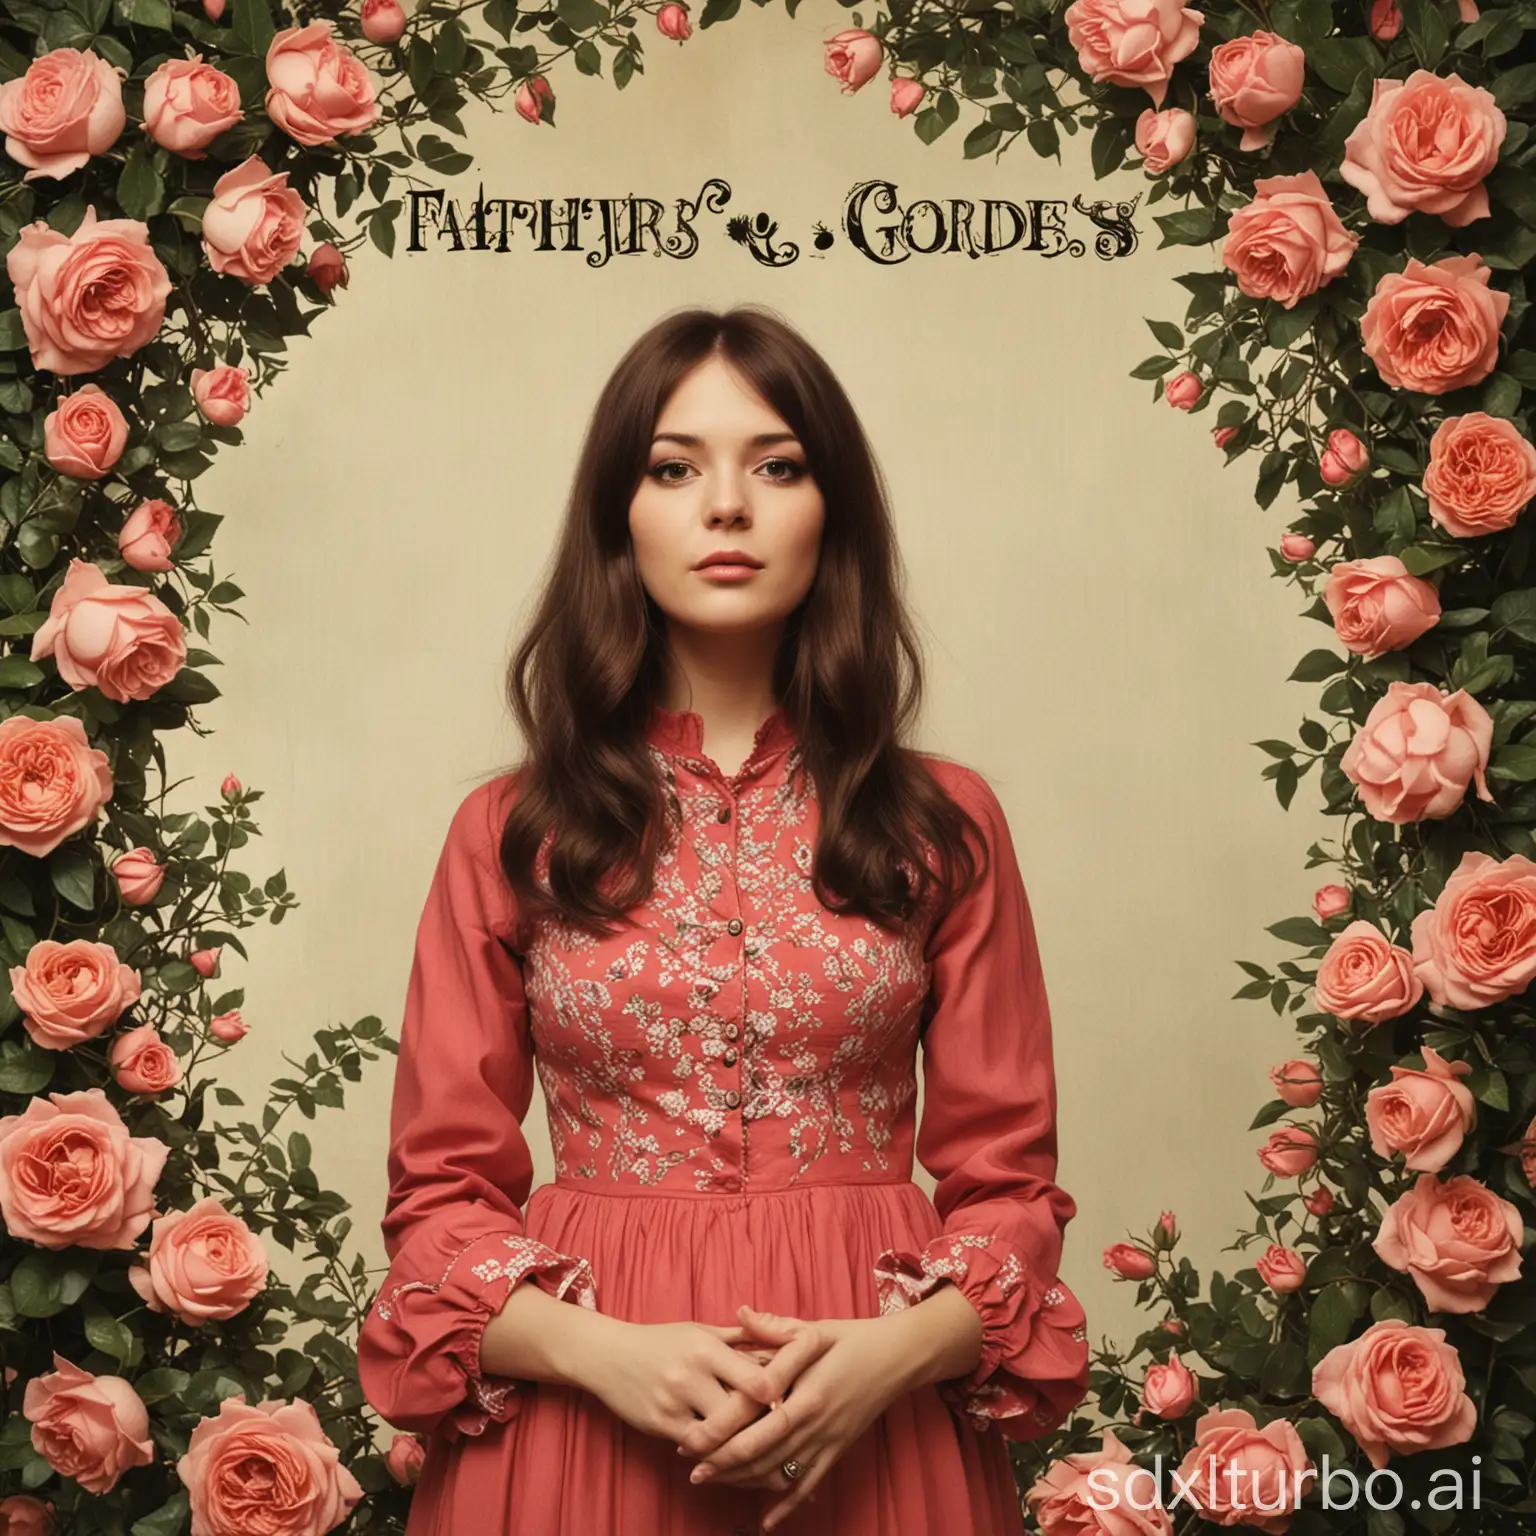 "Father's Garden Roses", girl, father,, cover,  60s, Sunshine pop, Folk, Baroque pop, Adult contemporary, Melodic, Folk rock, Soft rock, Warm